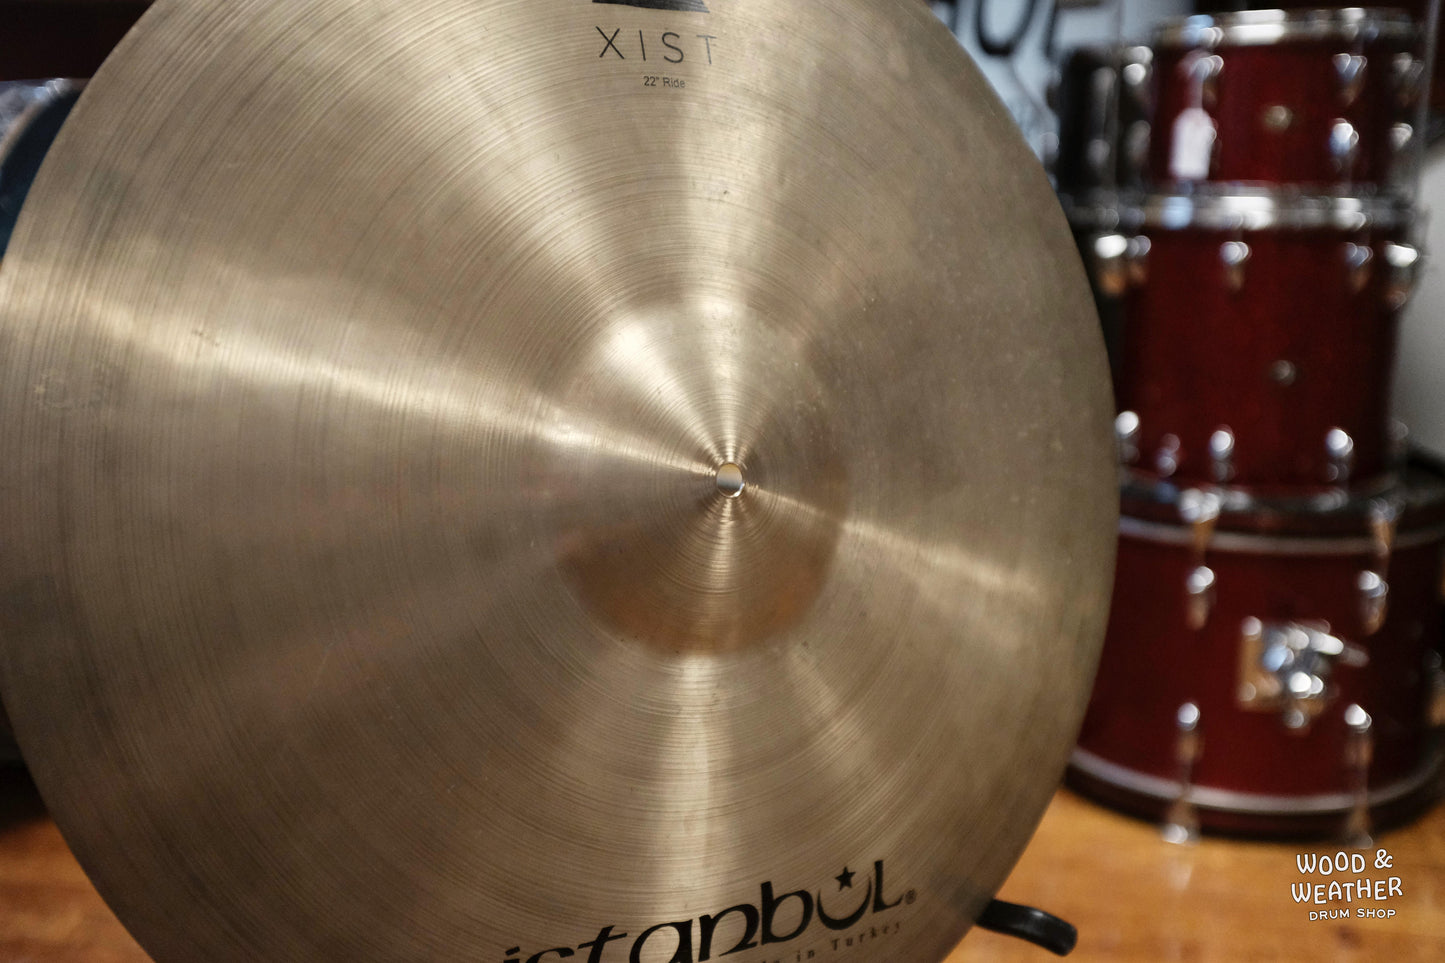 Used Istanbul Agop 22" Xist Ride Cymbal 3200g